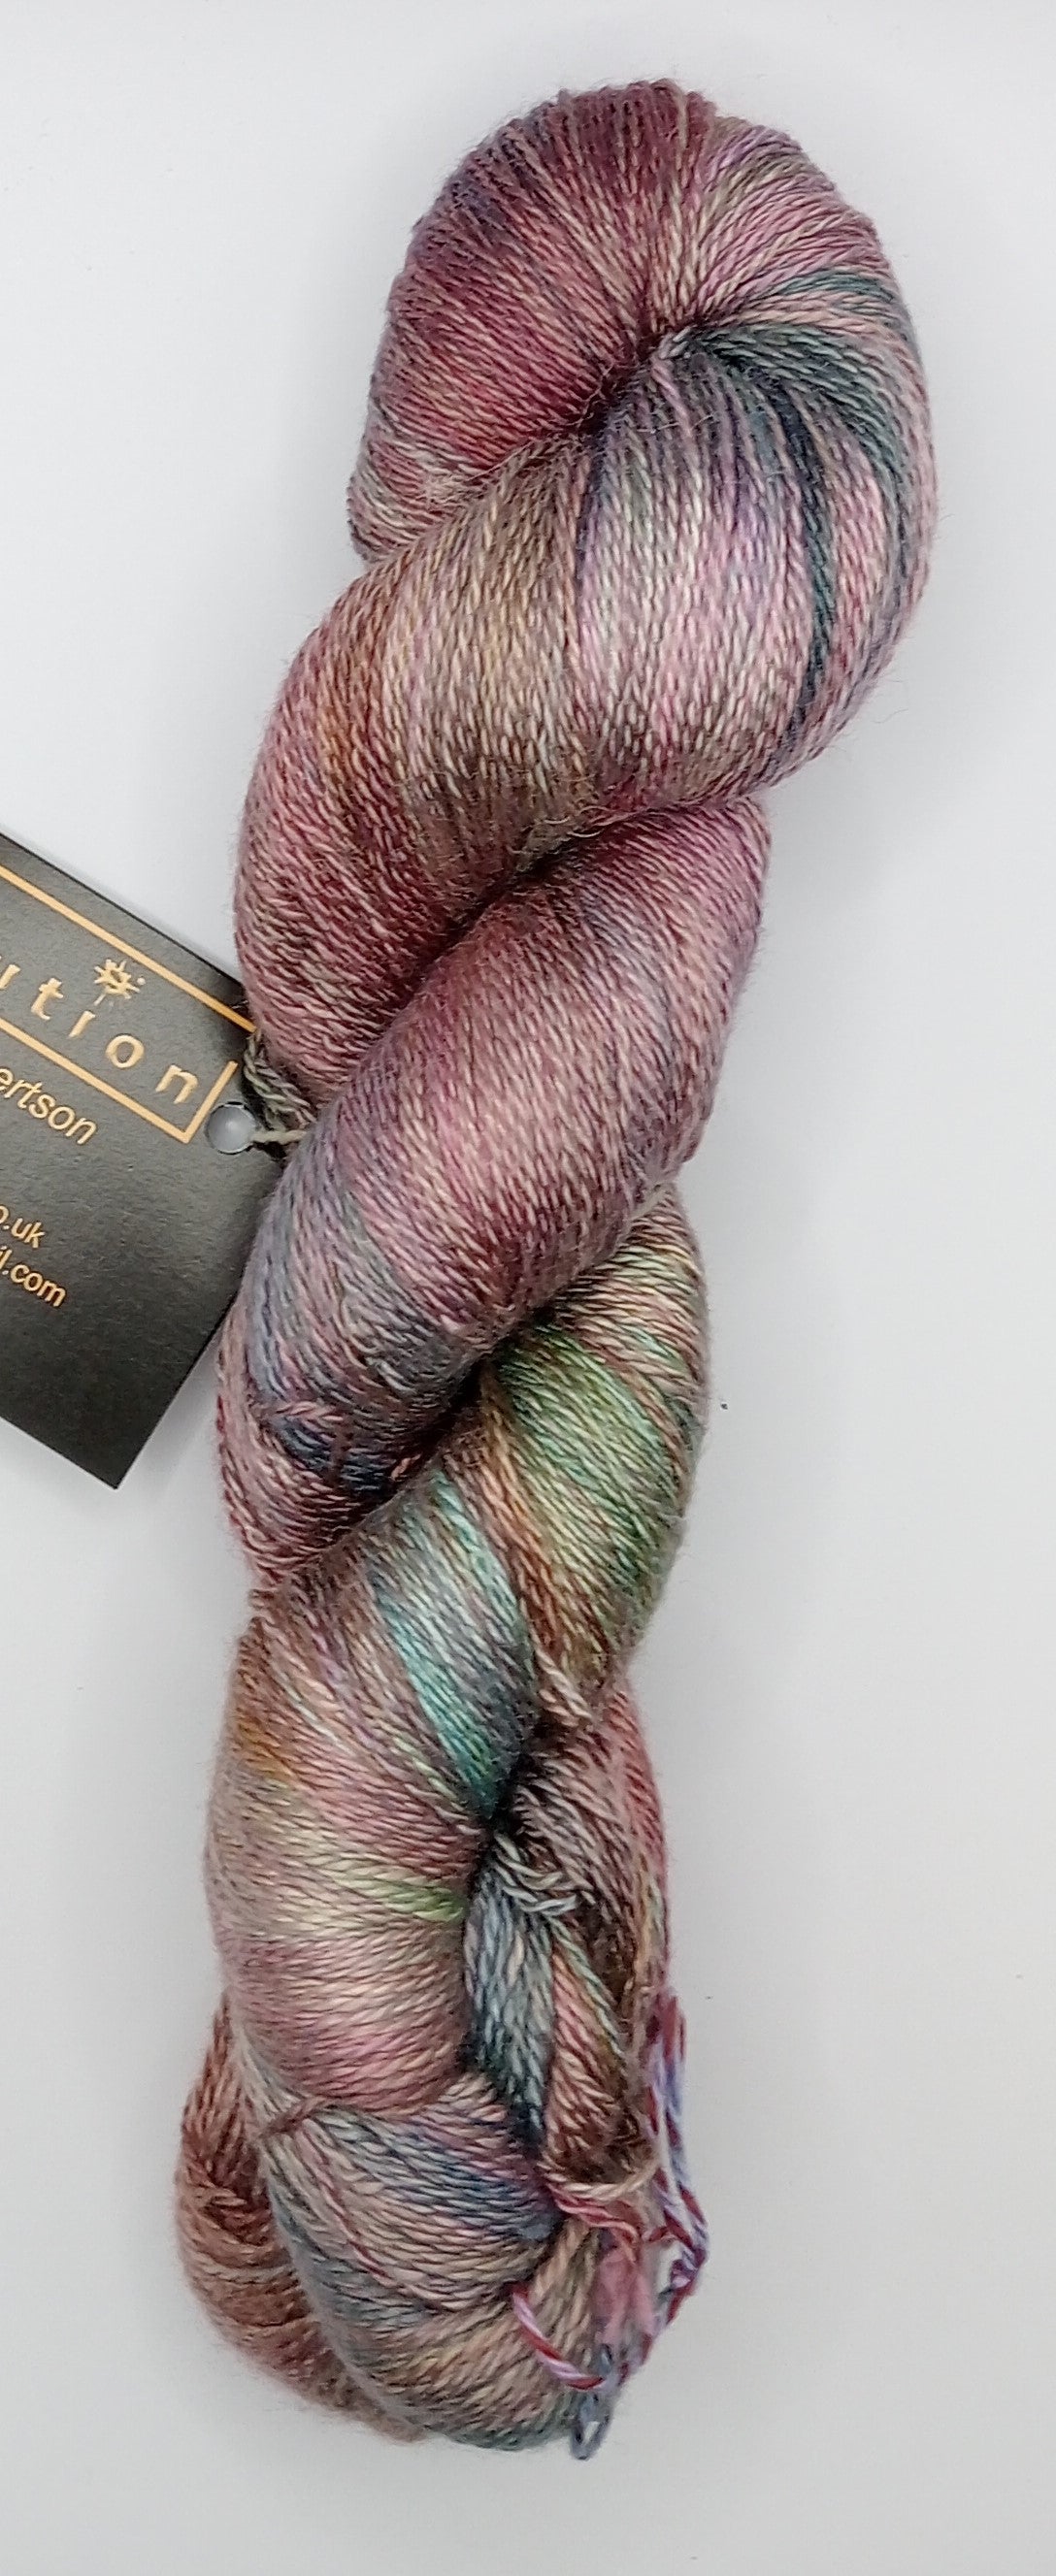 100G 'A' Grade Pure Mulberry Silk- "Raspberry and copper tones" Hand Dyed Luxury Lace weight